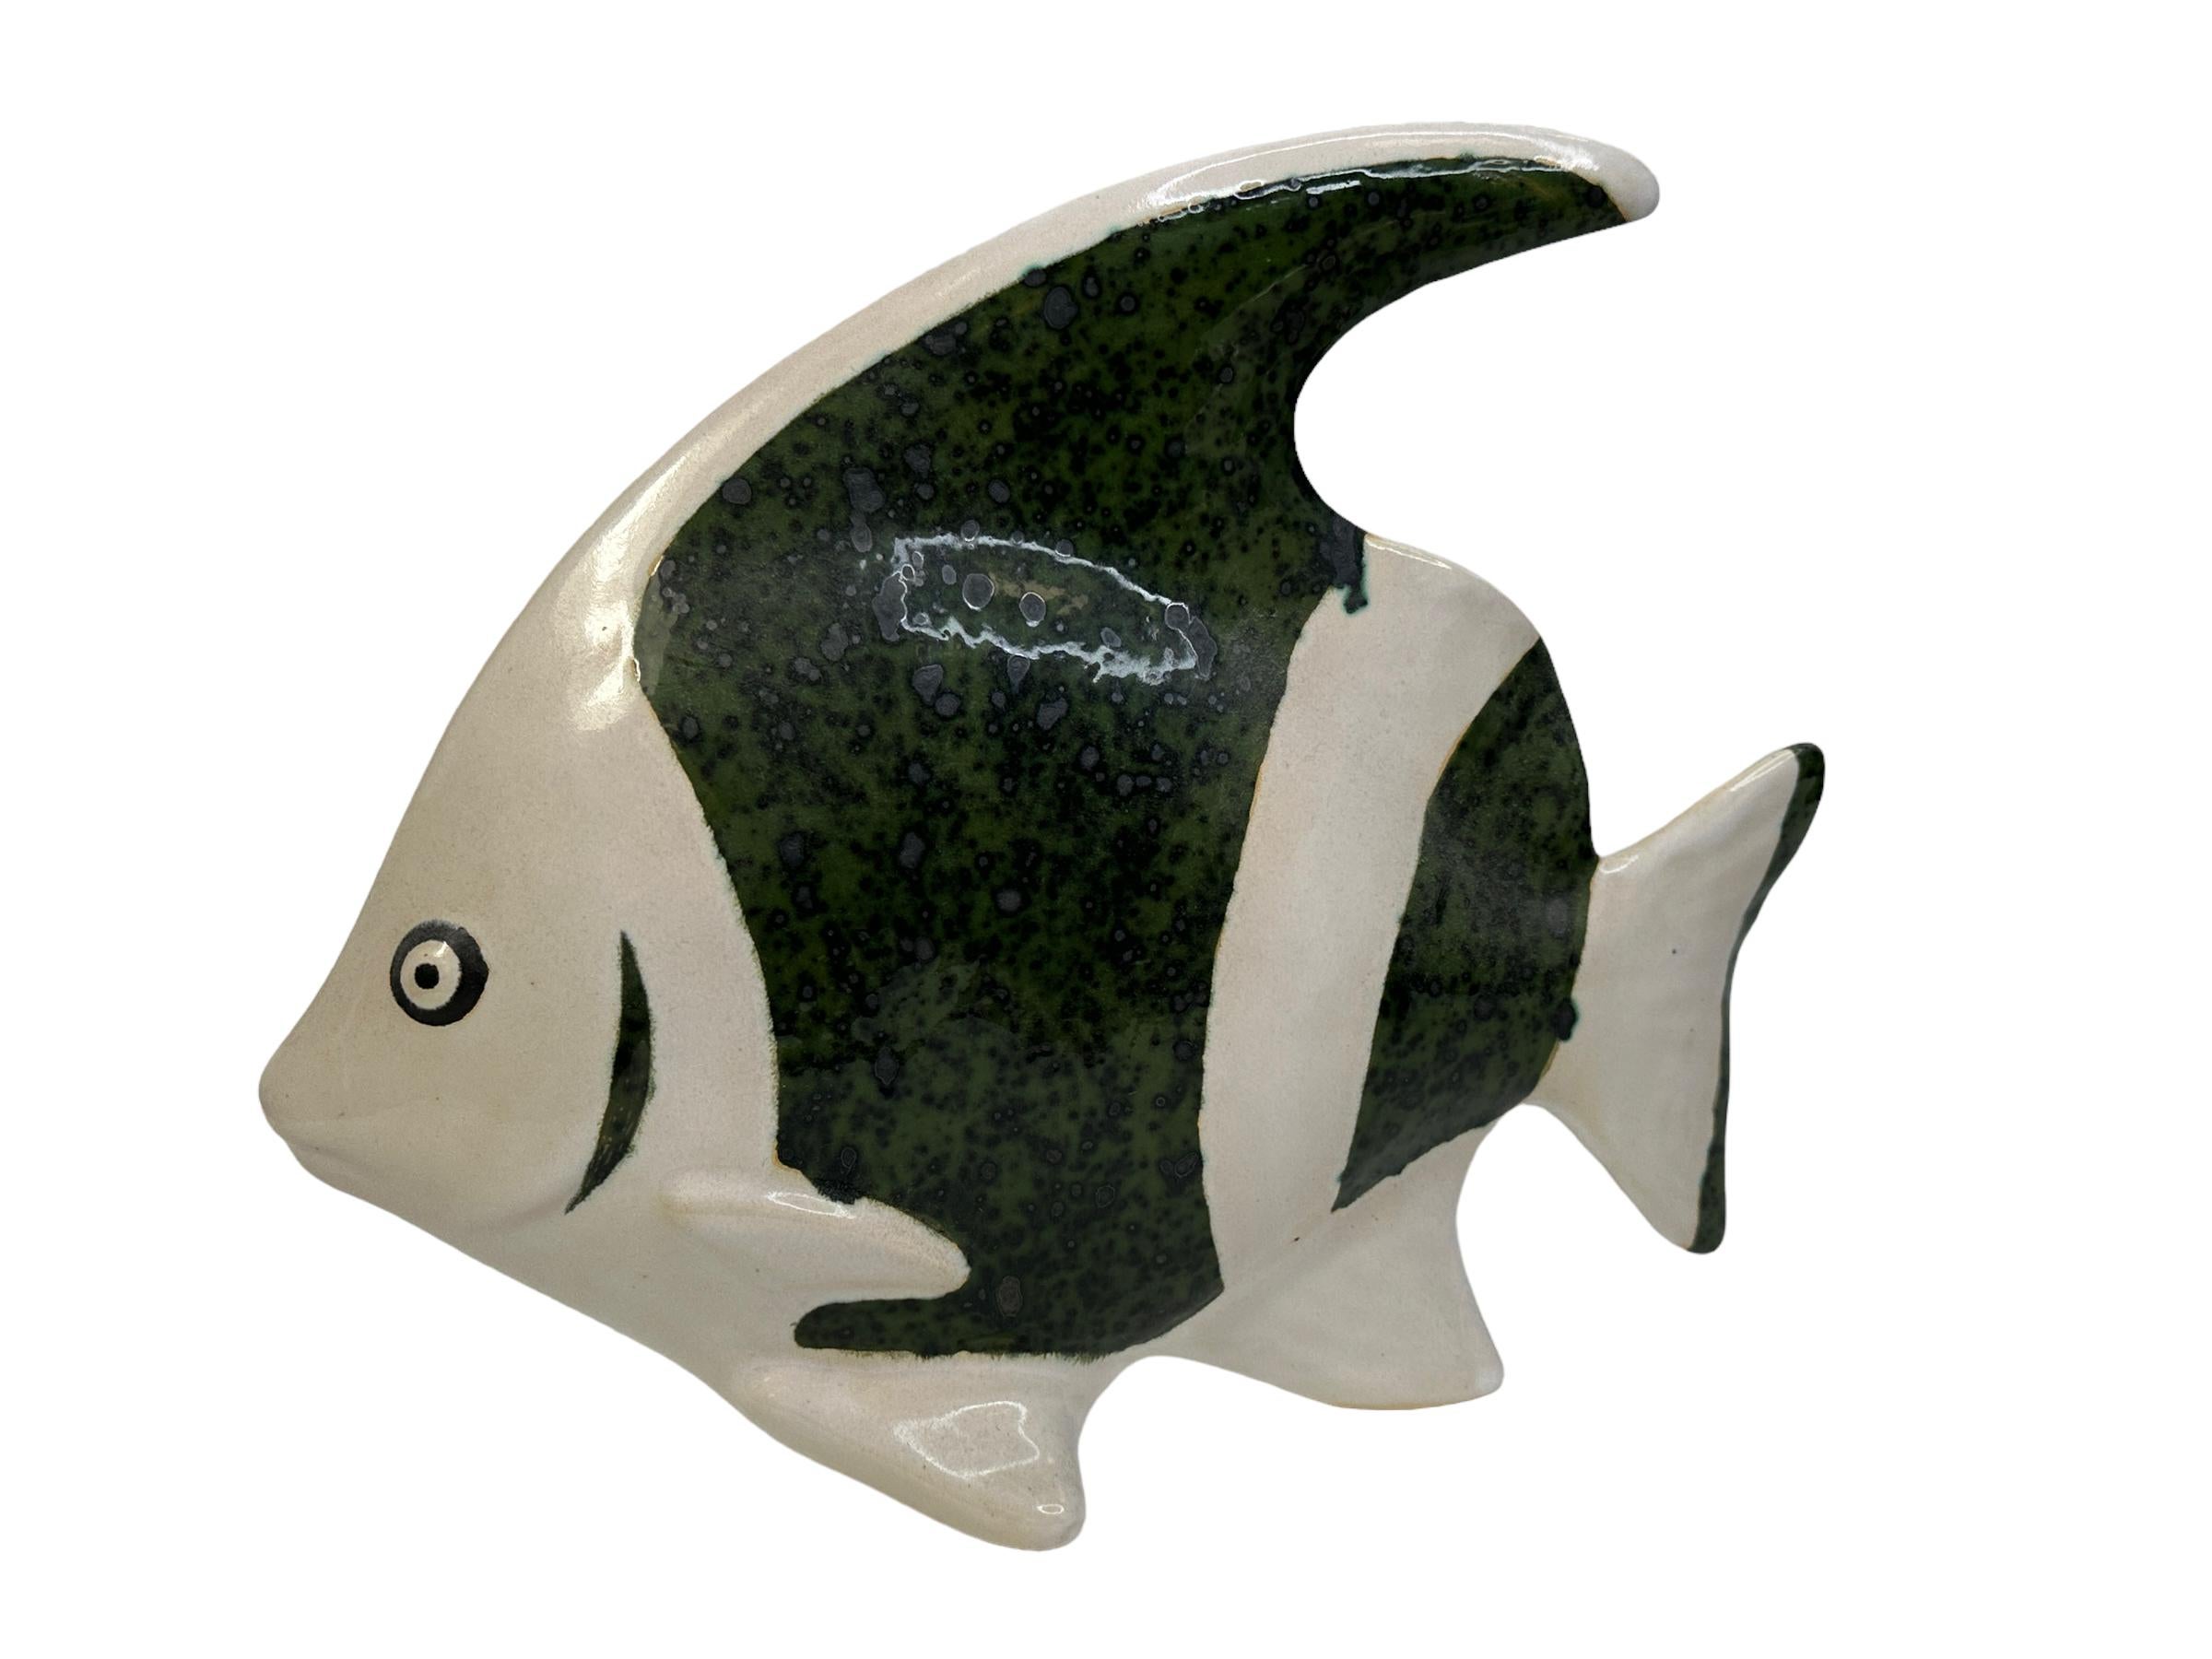 Hand-Crafted Set of Two Mid-Century Modern Studio Ceramic Fish Figures, Vintage German 1980s For Sale